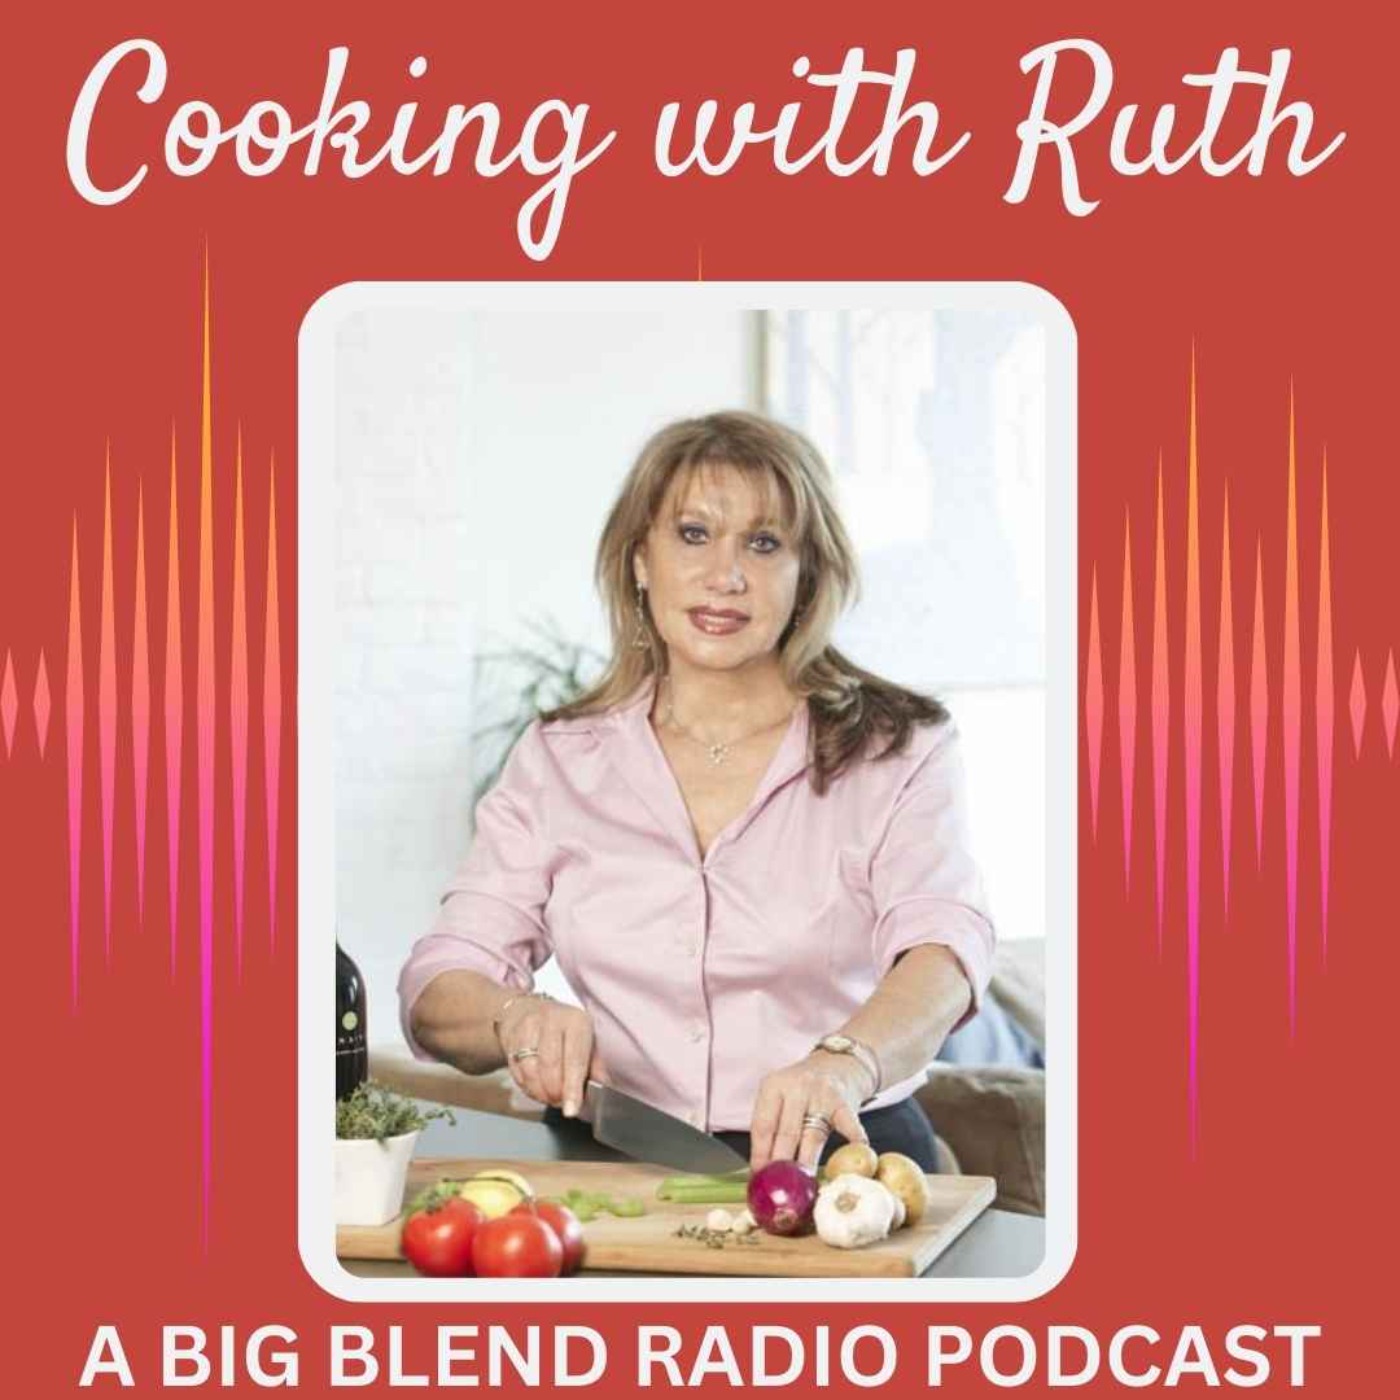 Cooking with Ruth